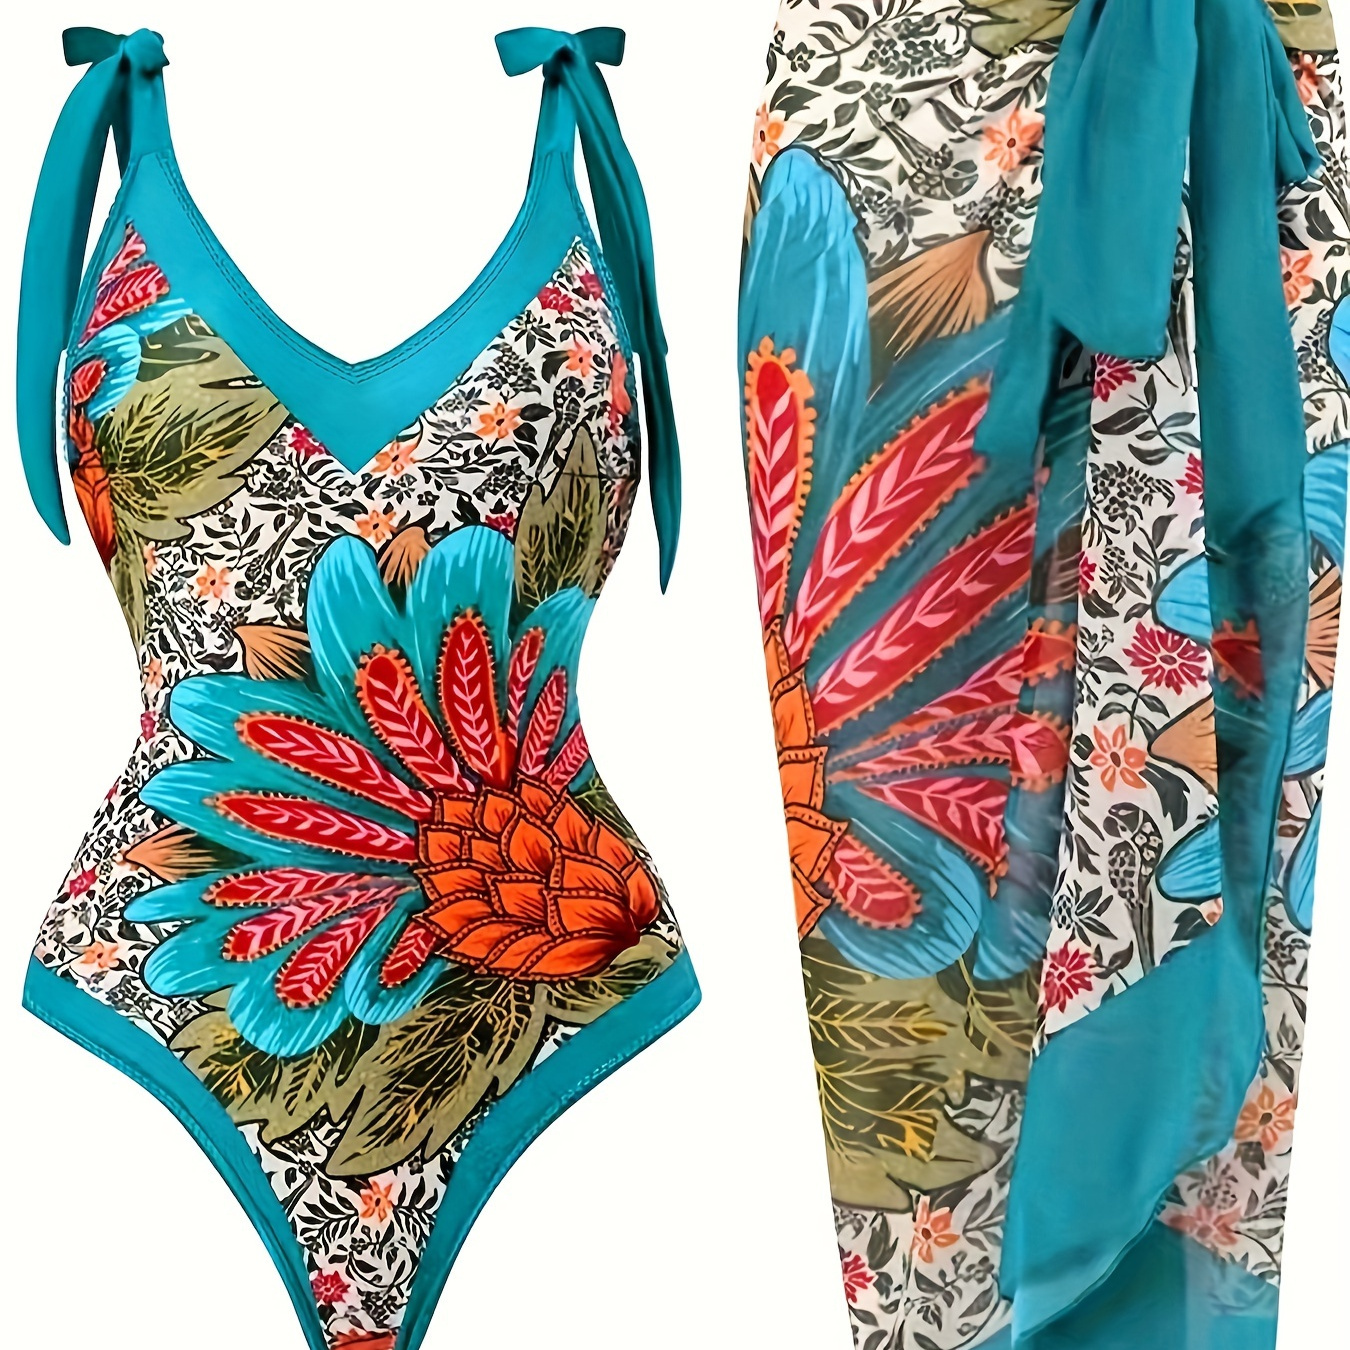 

Women's Boho Style One-piece Swimsuit With Cover Up, Plus Size Bow Tie Shoulder Straps V Neck Beach One-piece Bathing-suit & Cover Up Skirt 2 Piece Set